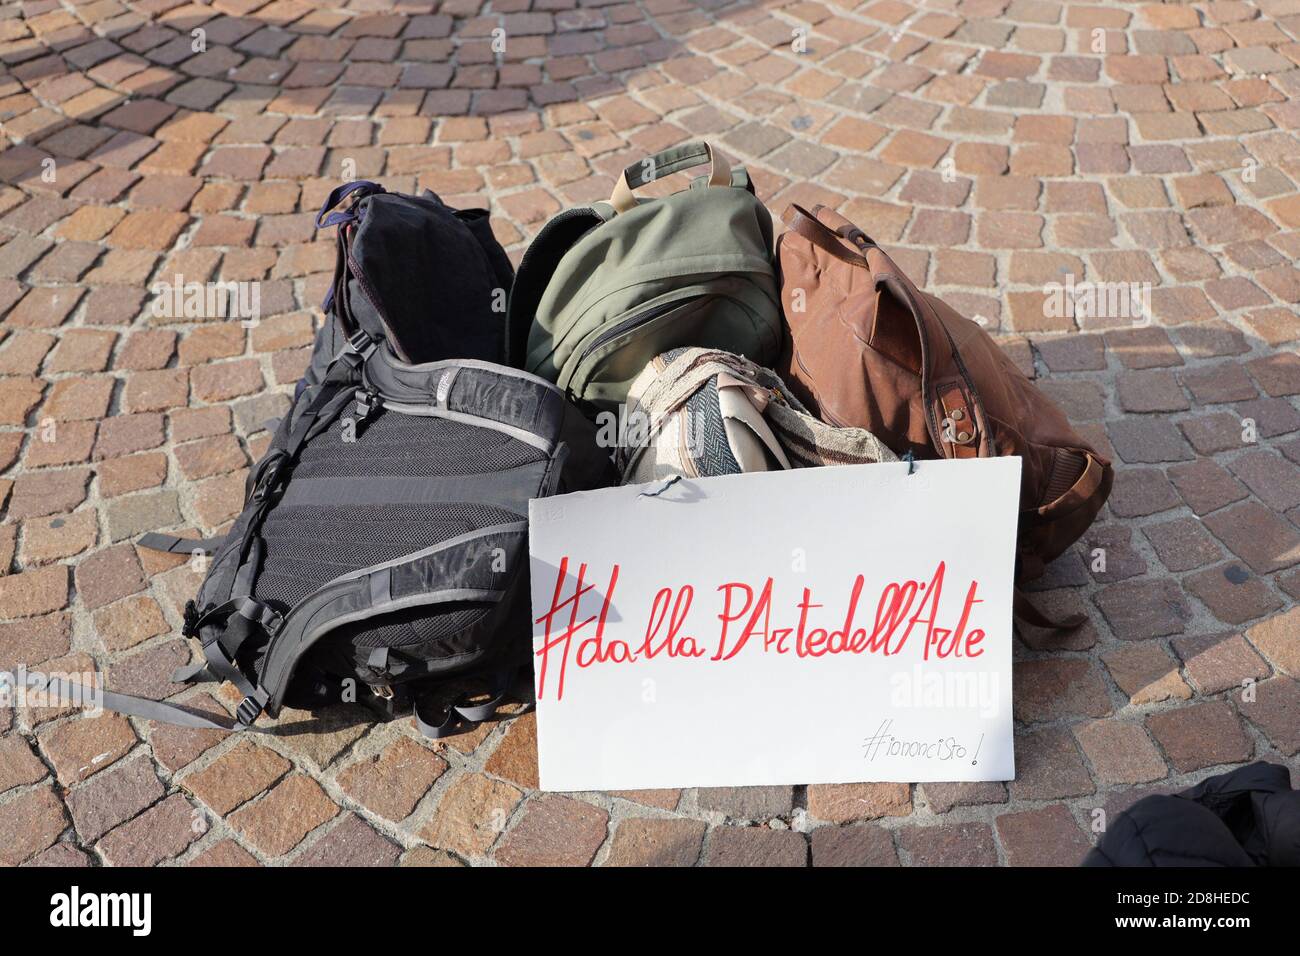 Turin, Italy. 30th Oct, 2020. Backpacks of people working in the cultural and entertainment sector demonstrating to highlight the plight facing the entertainment industry and its workers brought about by the COVID-19 pandemic. Credit: MLBARIONA/Alamy Live News Stock Photo